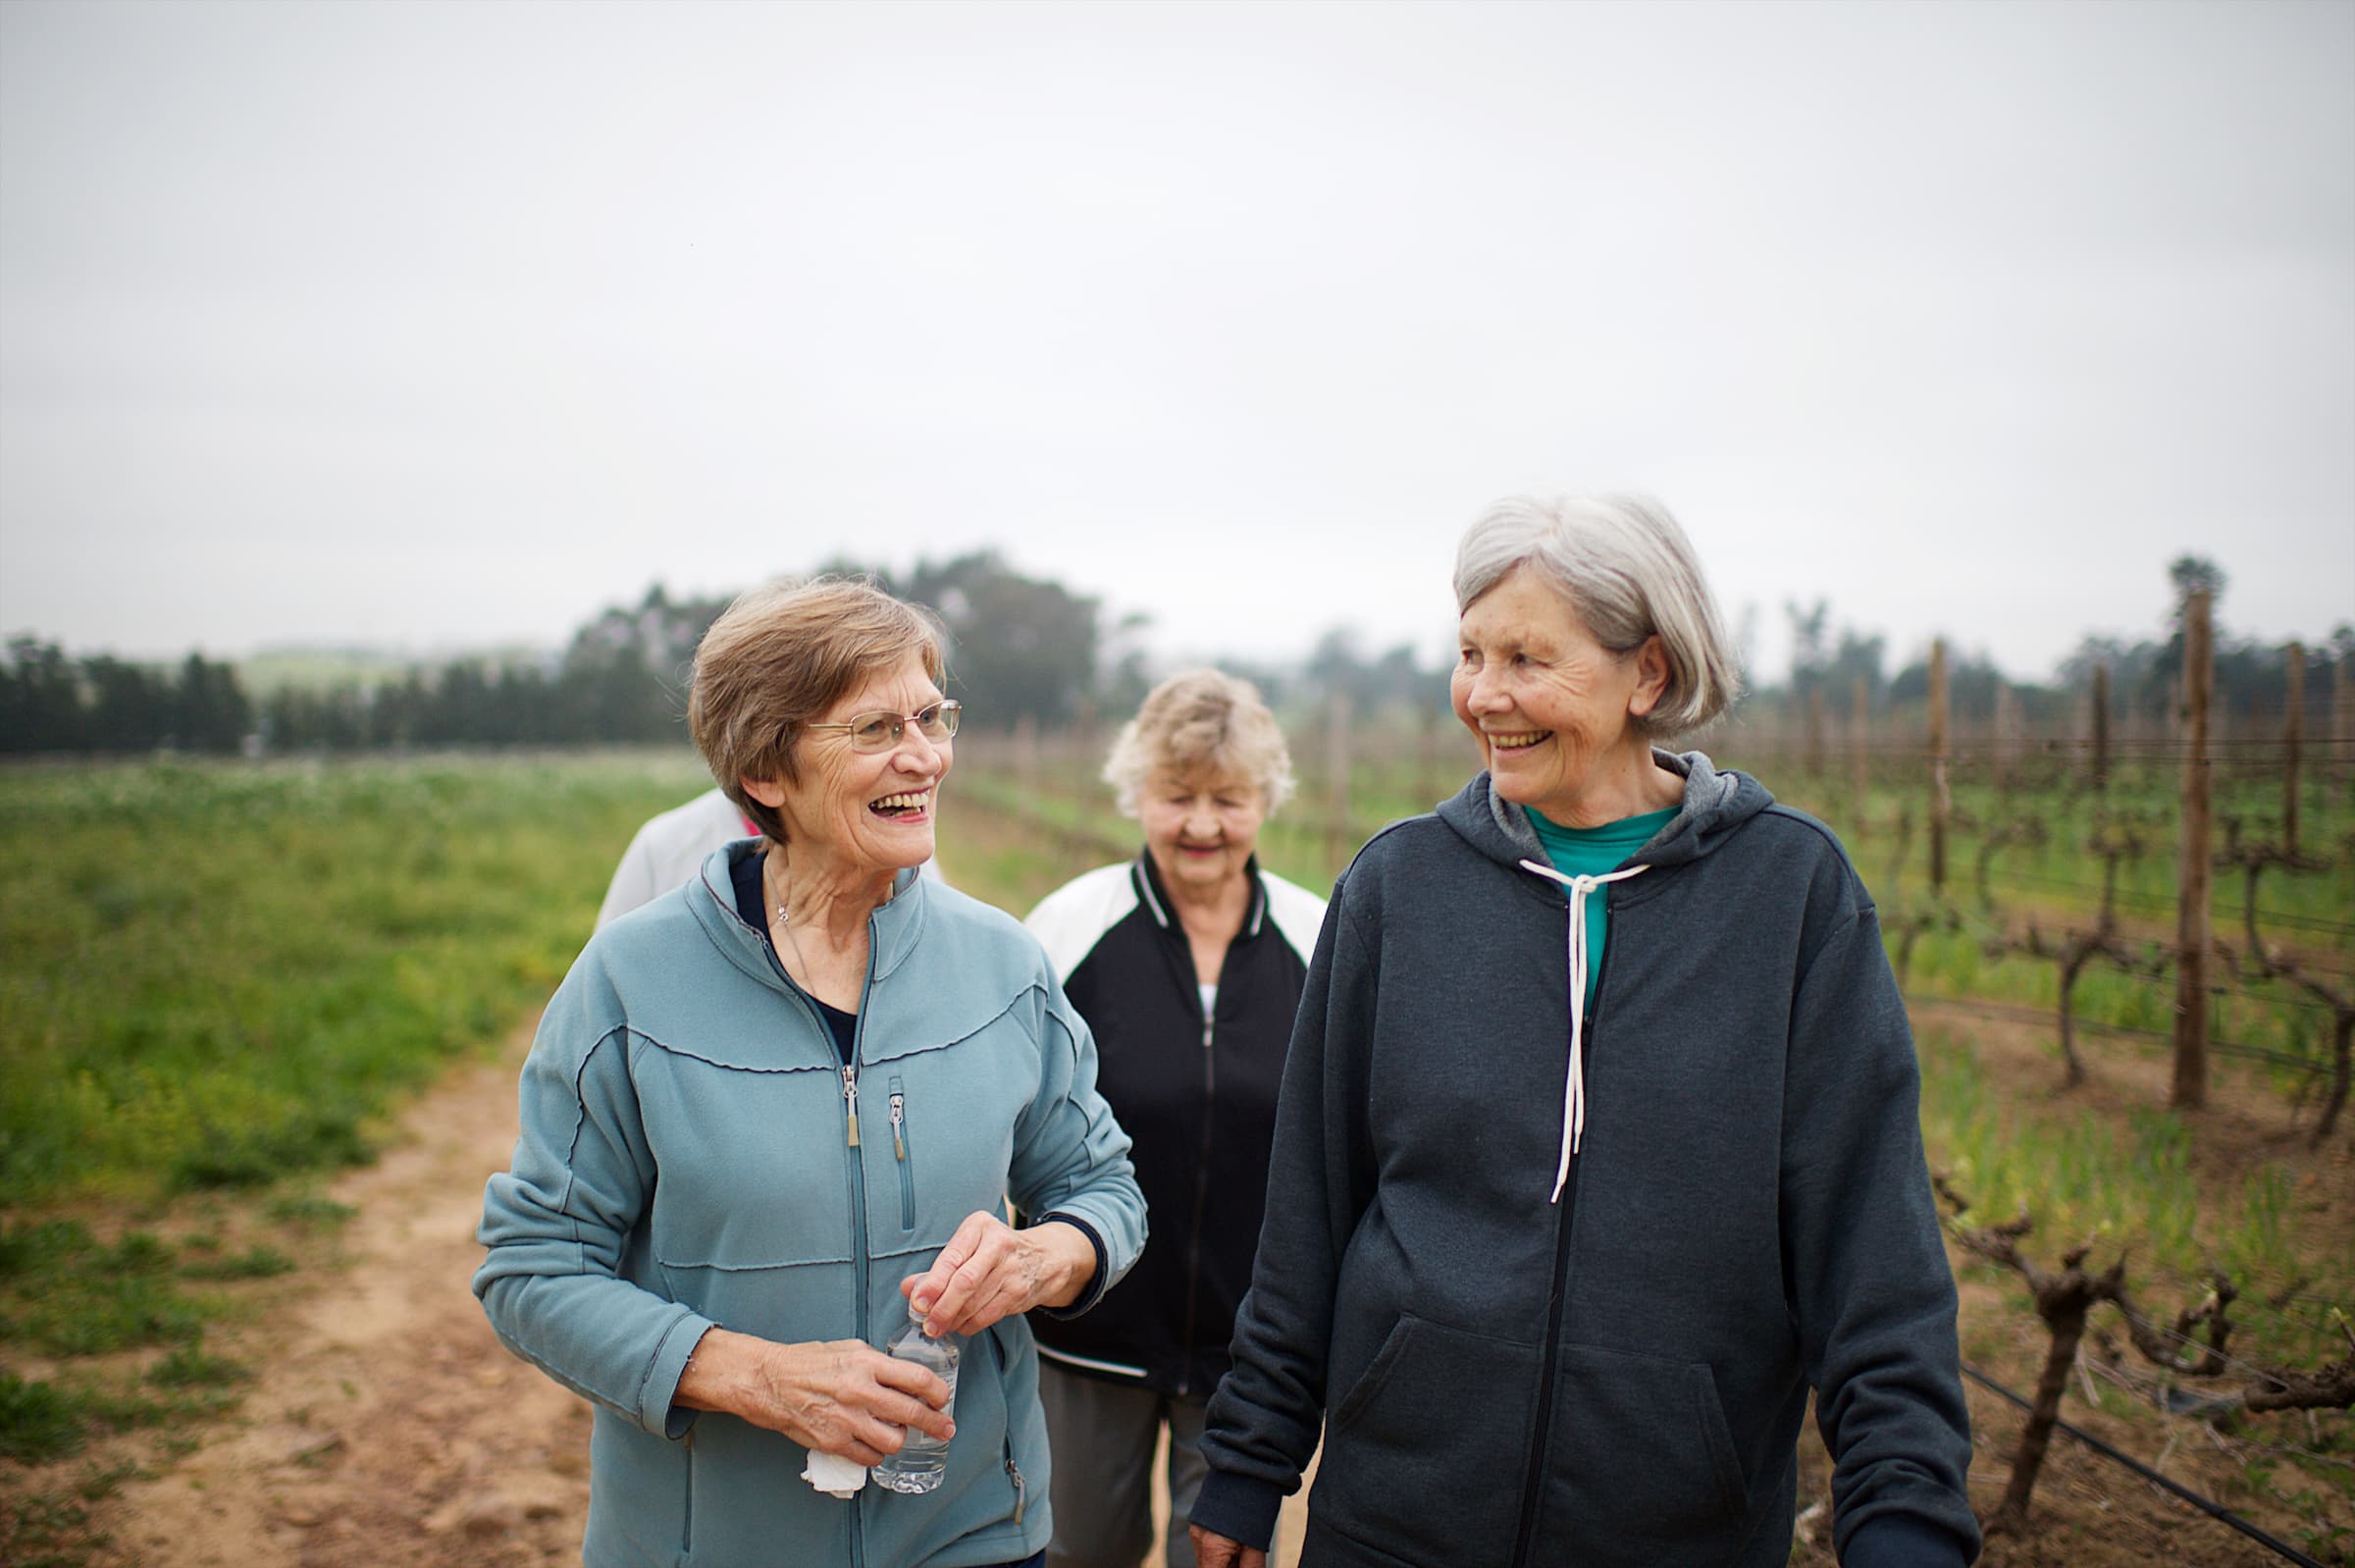 Four Active seniors women walking for exercise outdoors talking together on a misty morning